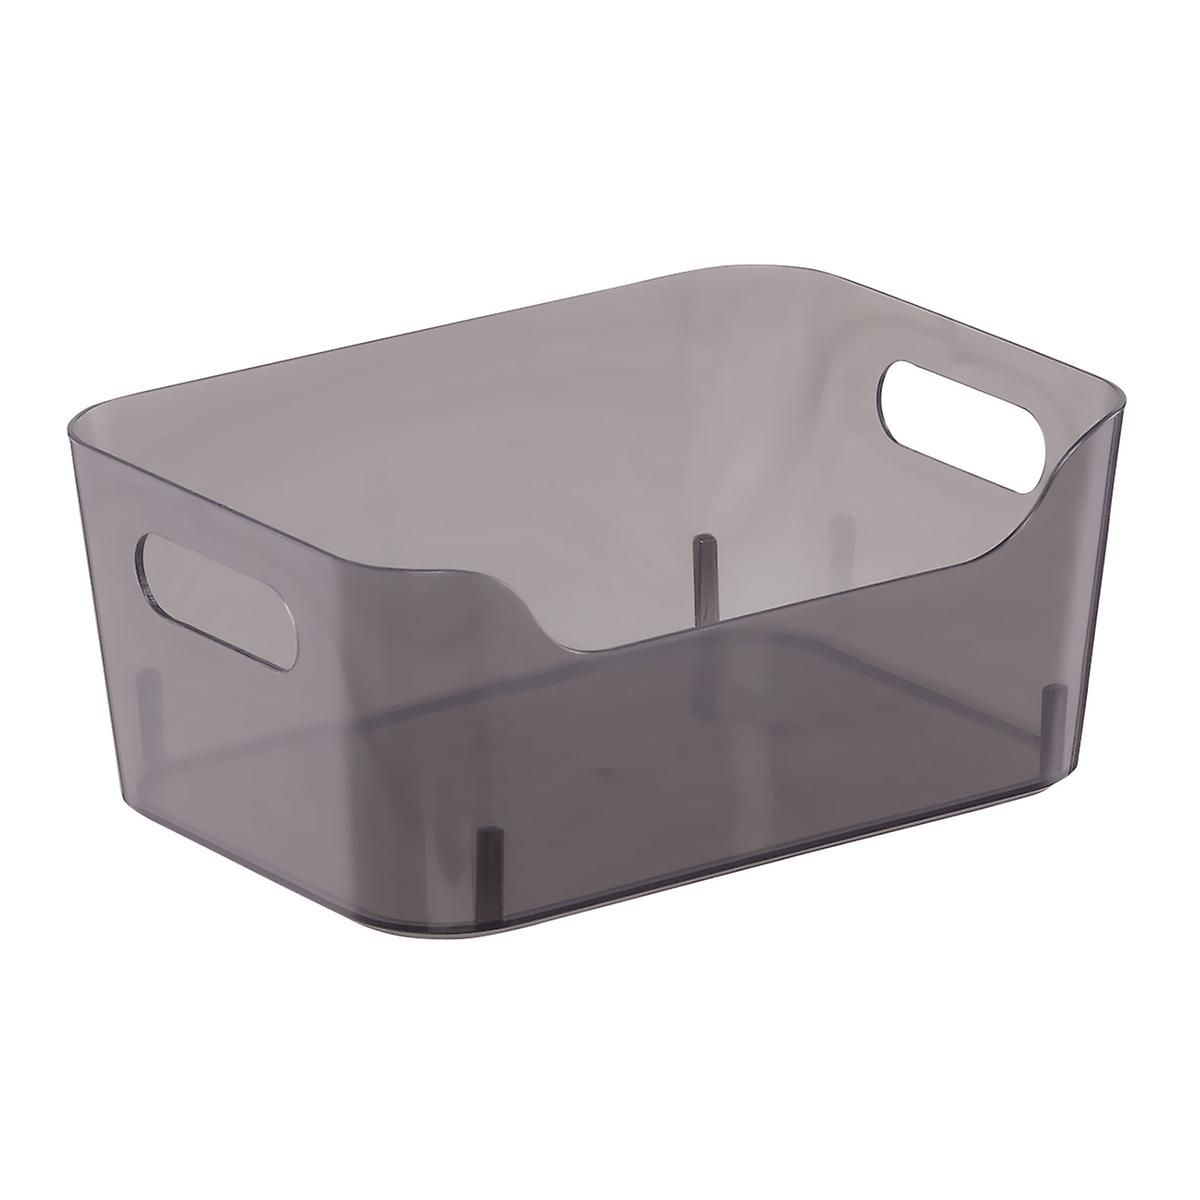 Case of 12 Small Plastic Bins w/ Handles Smoke | The Container Store